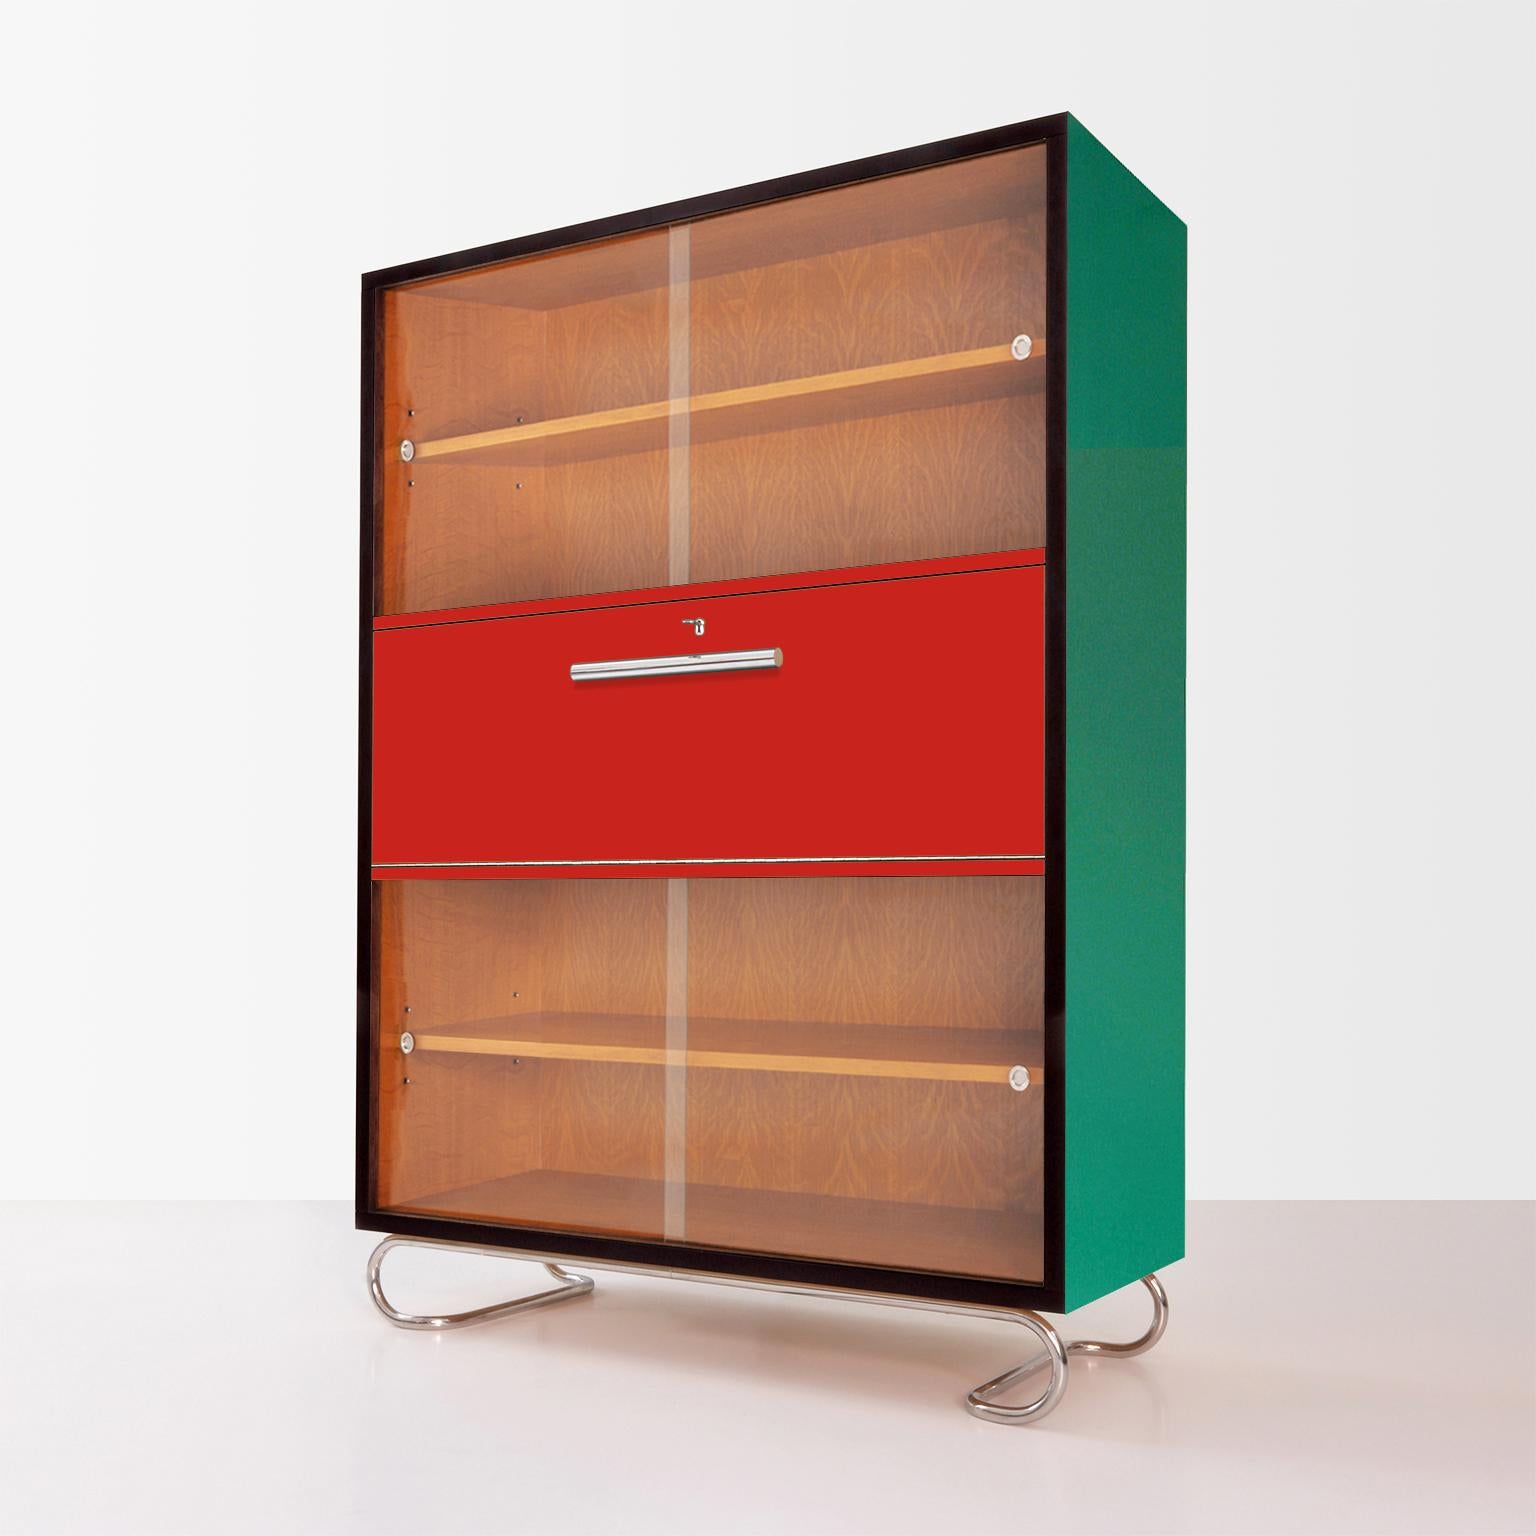 German modernism 'Dahlem' secretary showcase designed and manufactured by GMD Berlin. Wood lacquering in various colors and finish. Available on request in different amounts. Delivery time: 7-8 weeks.